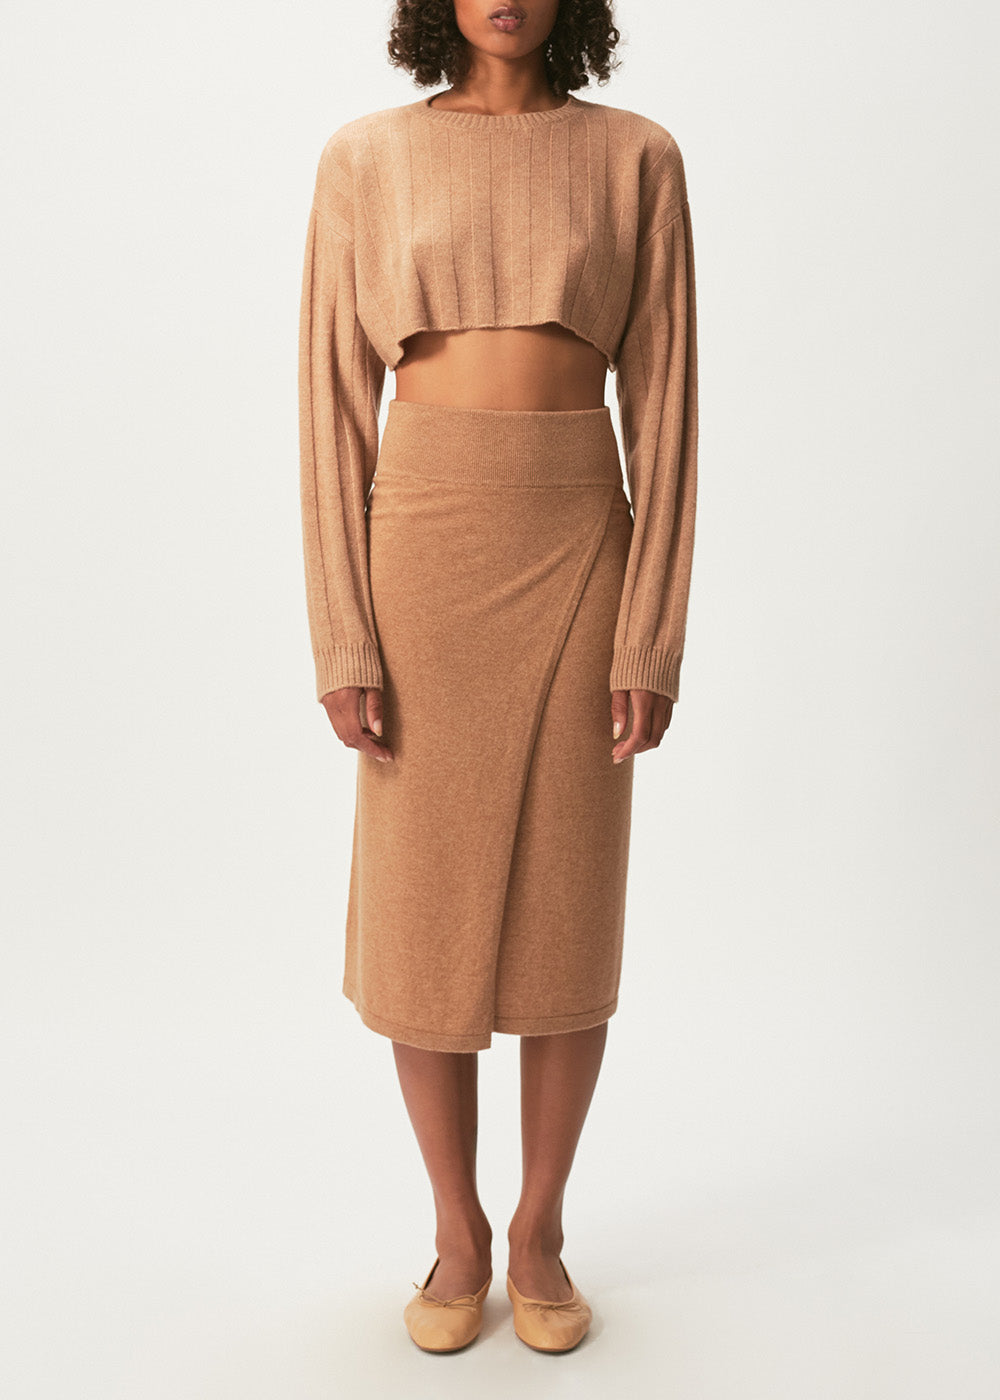 Remy Cropped Jumper - One Size / Camel